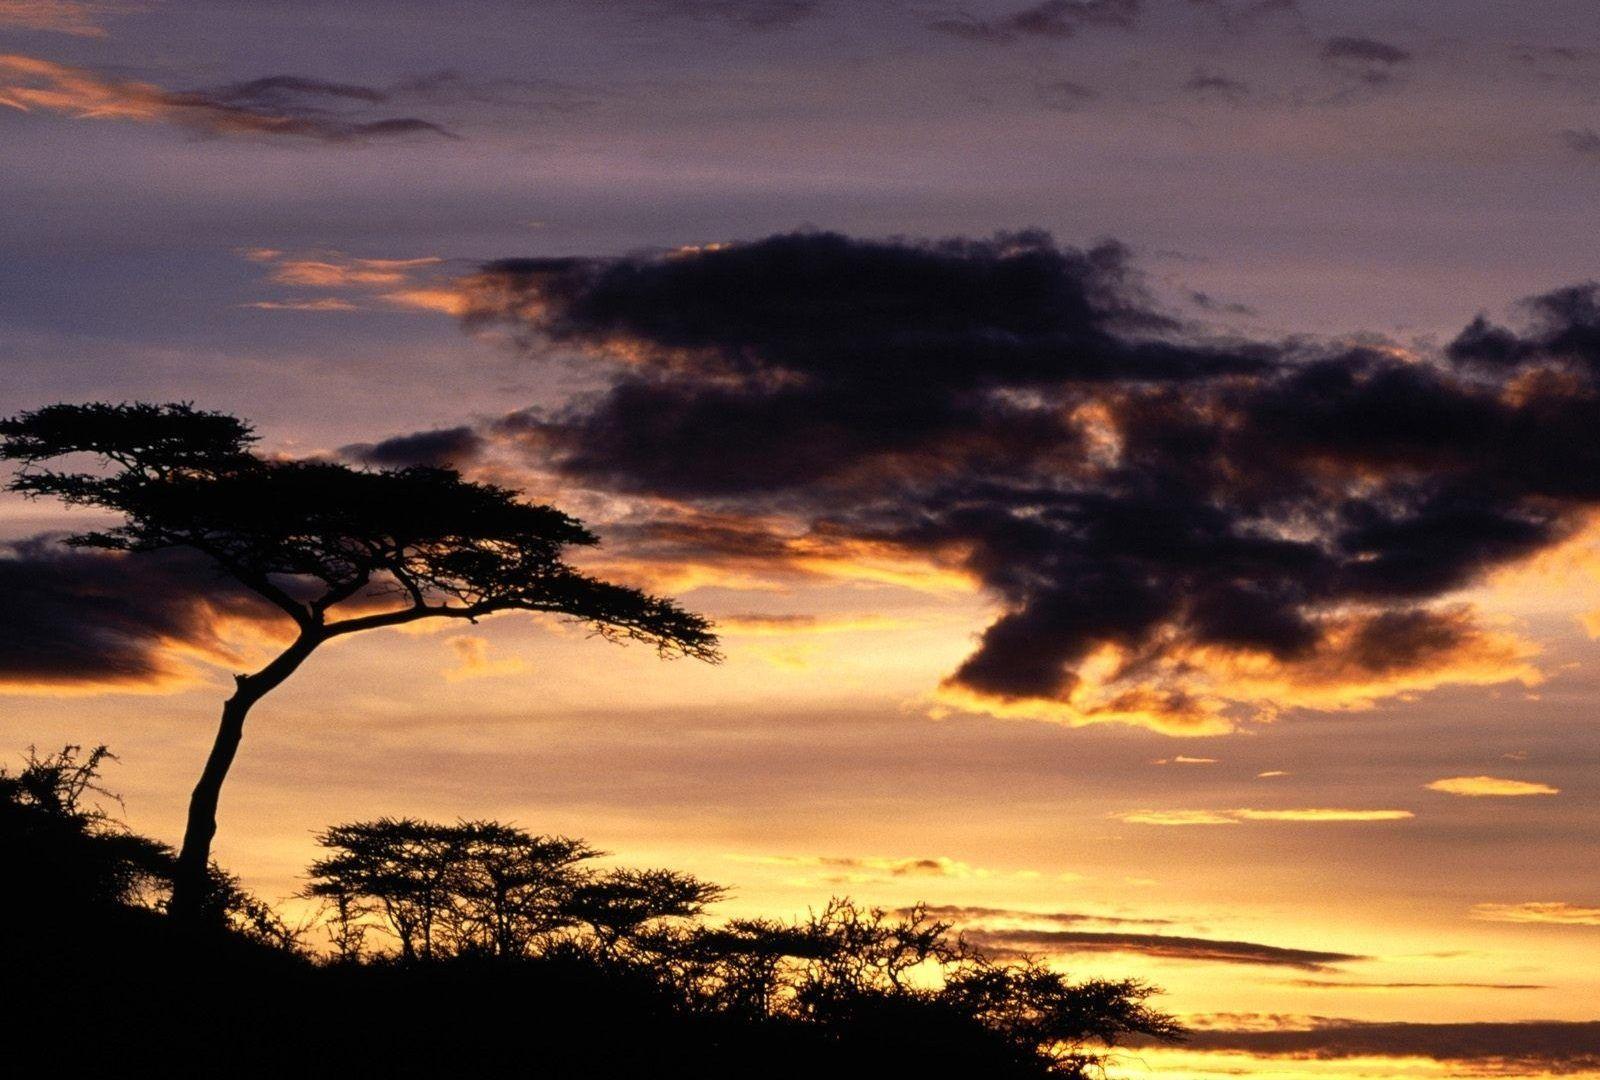 New Tag wallpaper: Africa Beautiful Nature Sky New